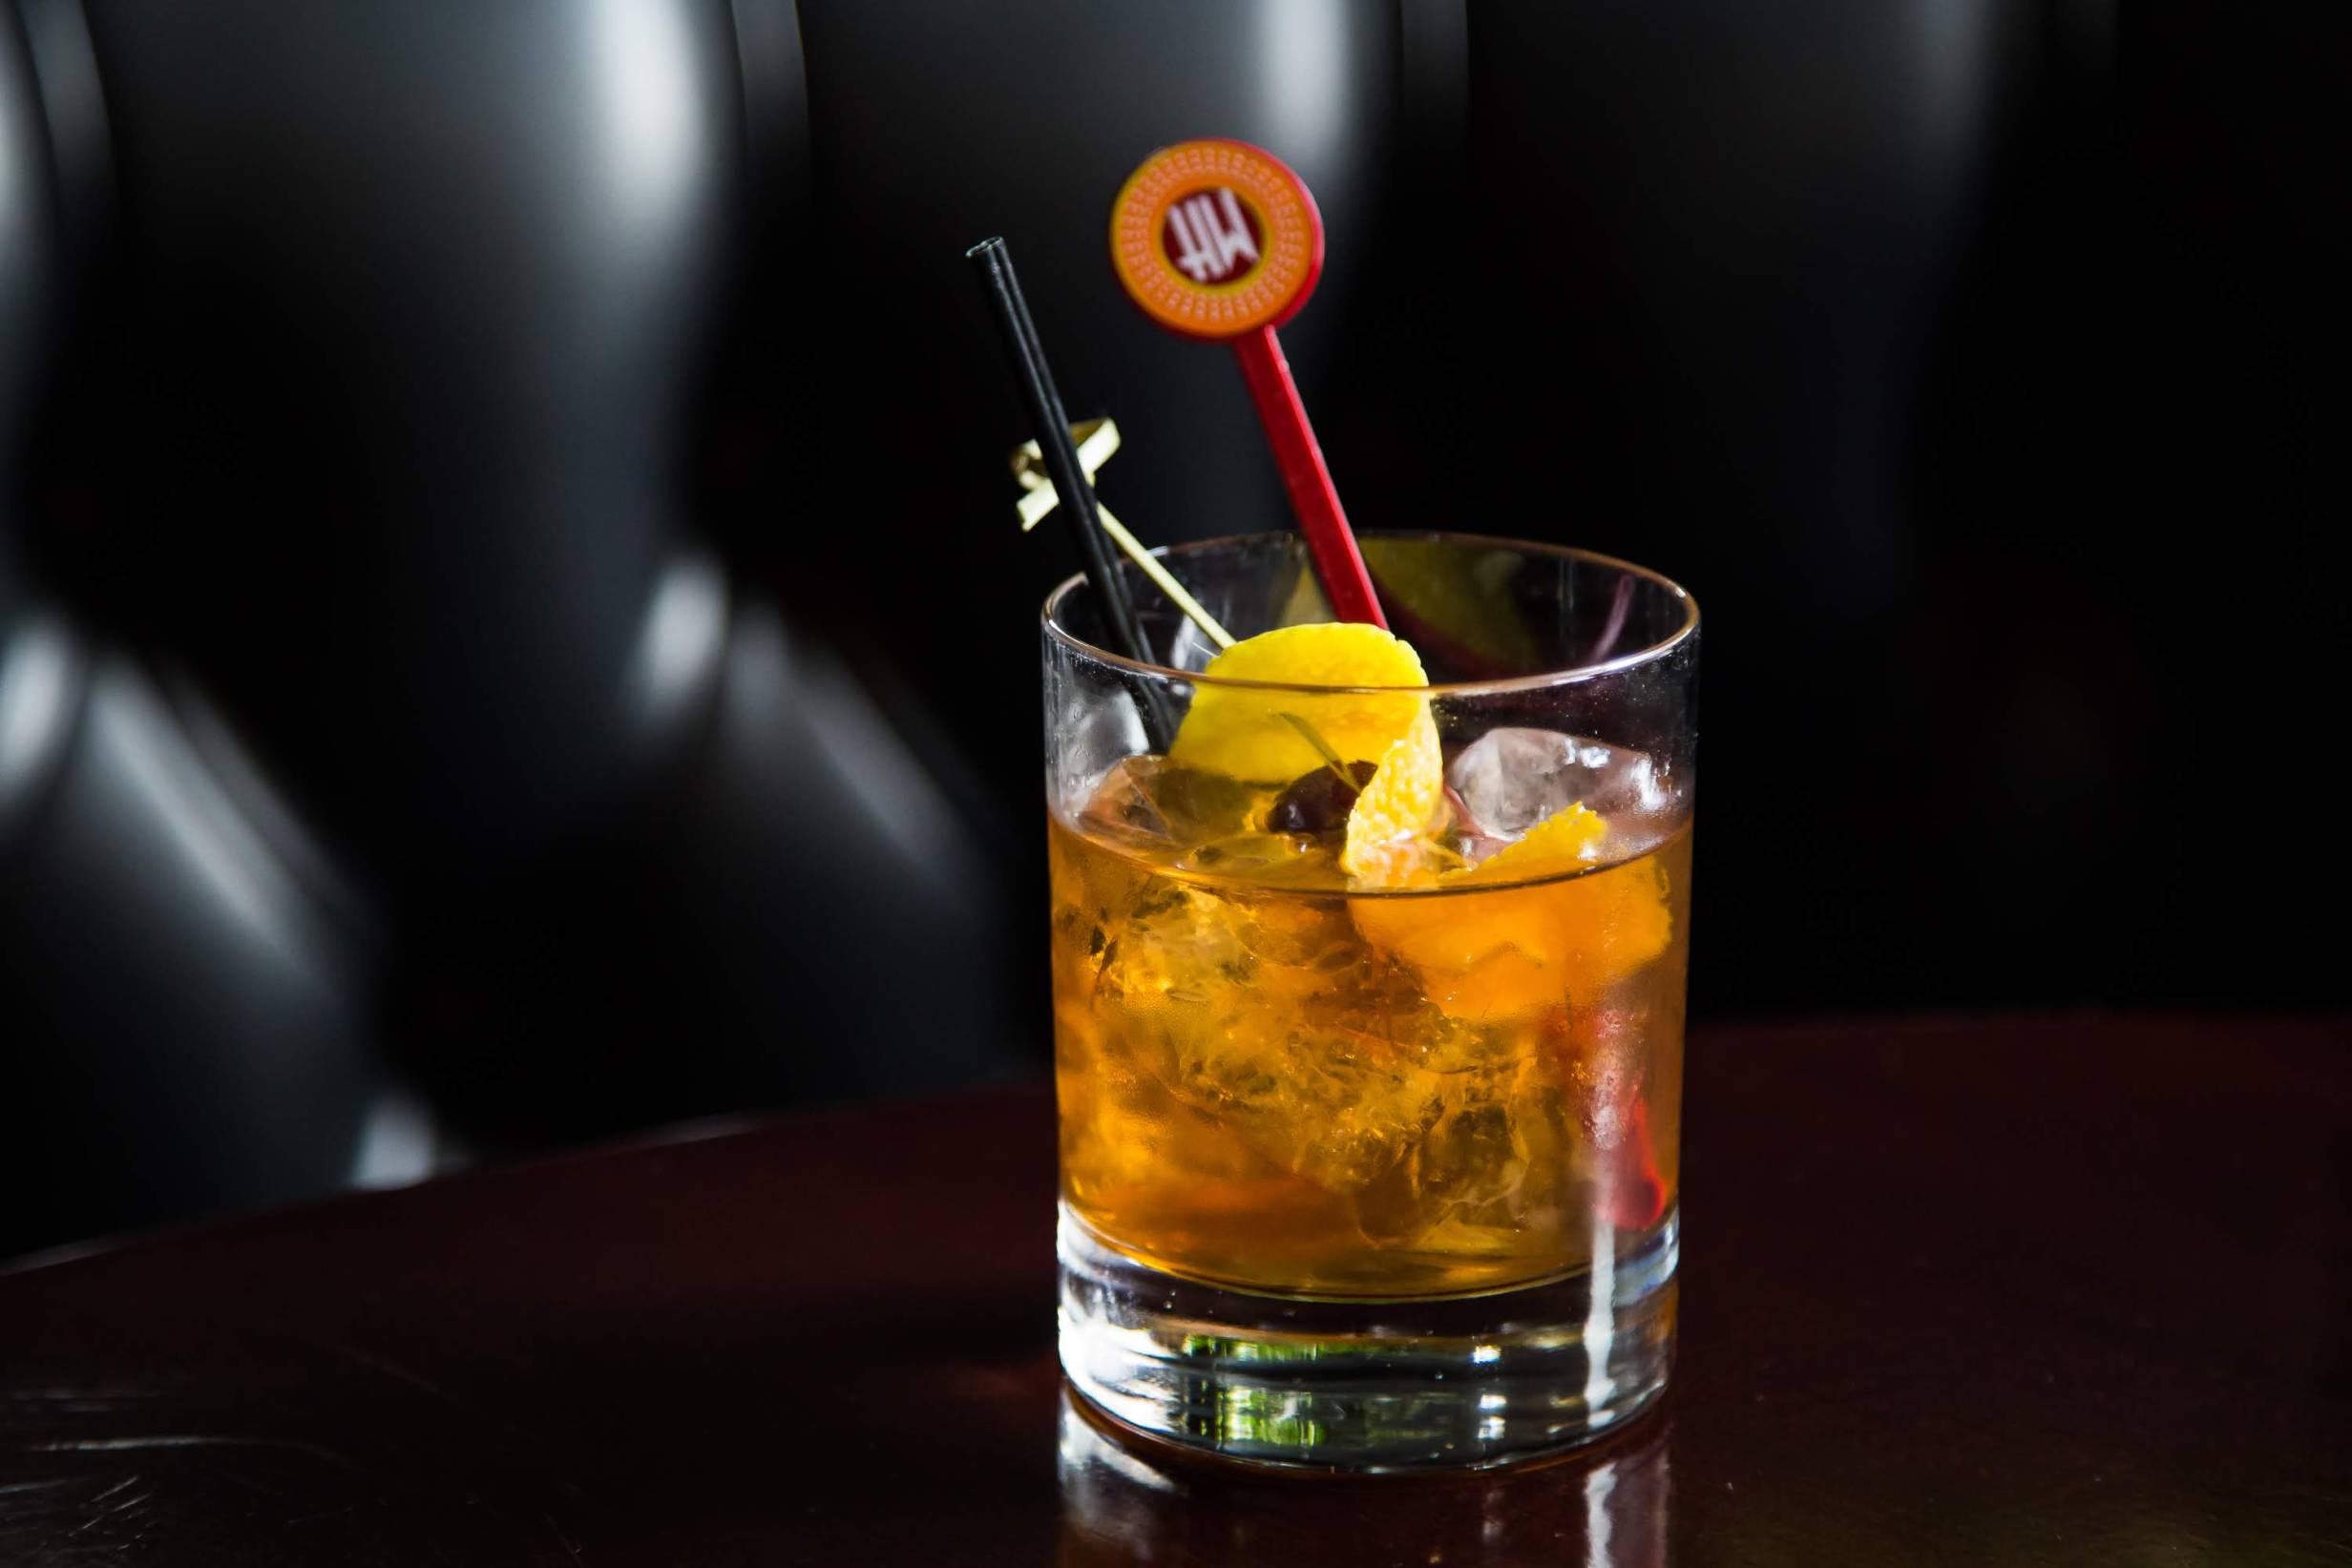 A thick-bottomed rocks glass sits on a dark wood table. In the background is the diamond tufted pattern of the black leather booth at which the drink is served. The drink is Â¾ full of large, clear ice cubes and a bourbon cocktail. A red Hamilton Walkerâ€™s swizzle stick and an orange peel twisted around a cherry, both speared on a bamboo toothpick, accent the drink. Photo by Hamilton Walkerâ€™s.